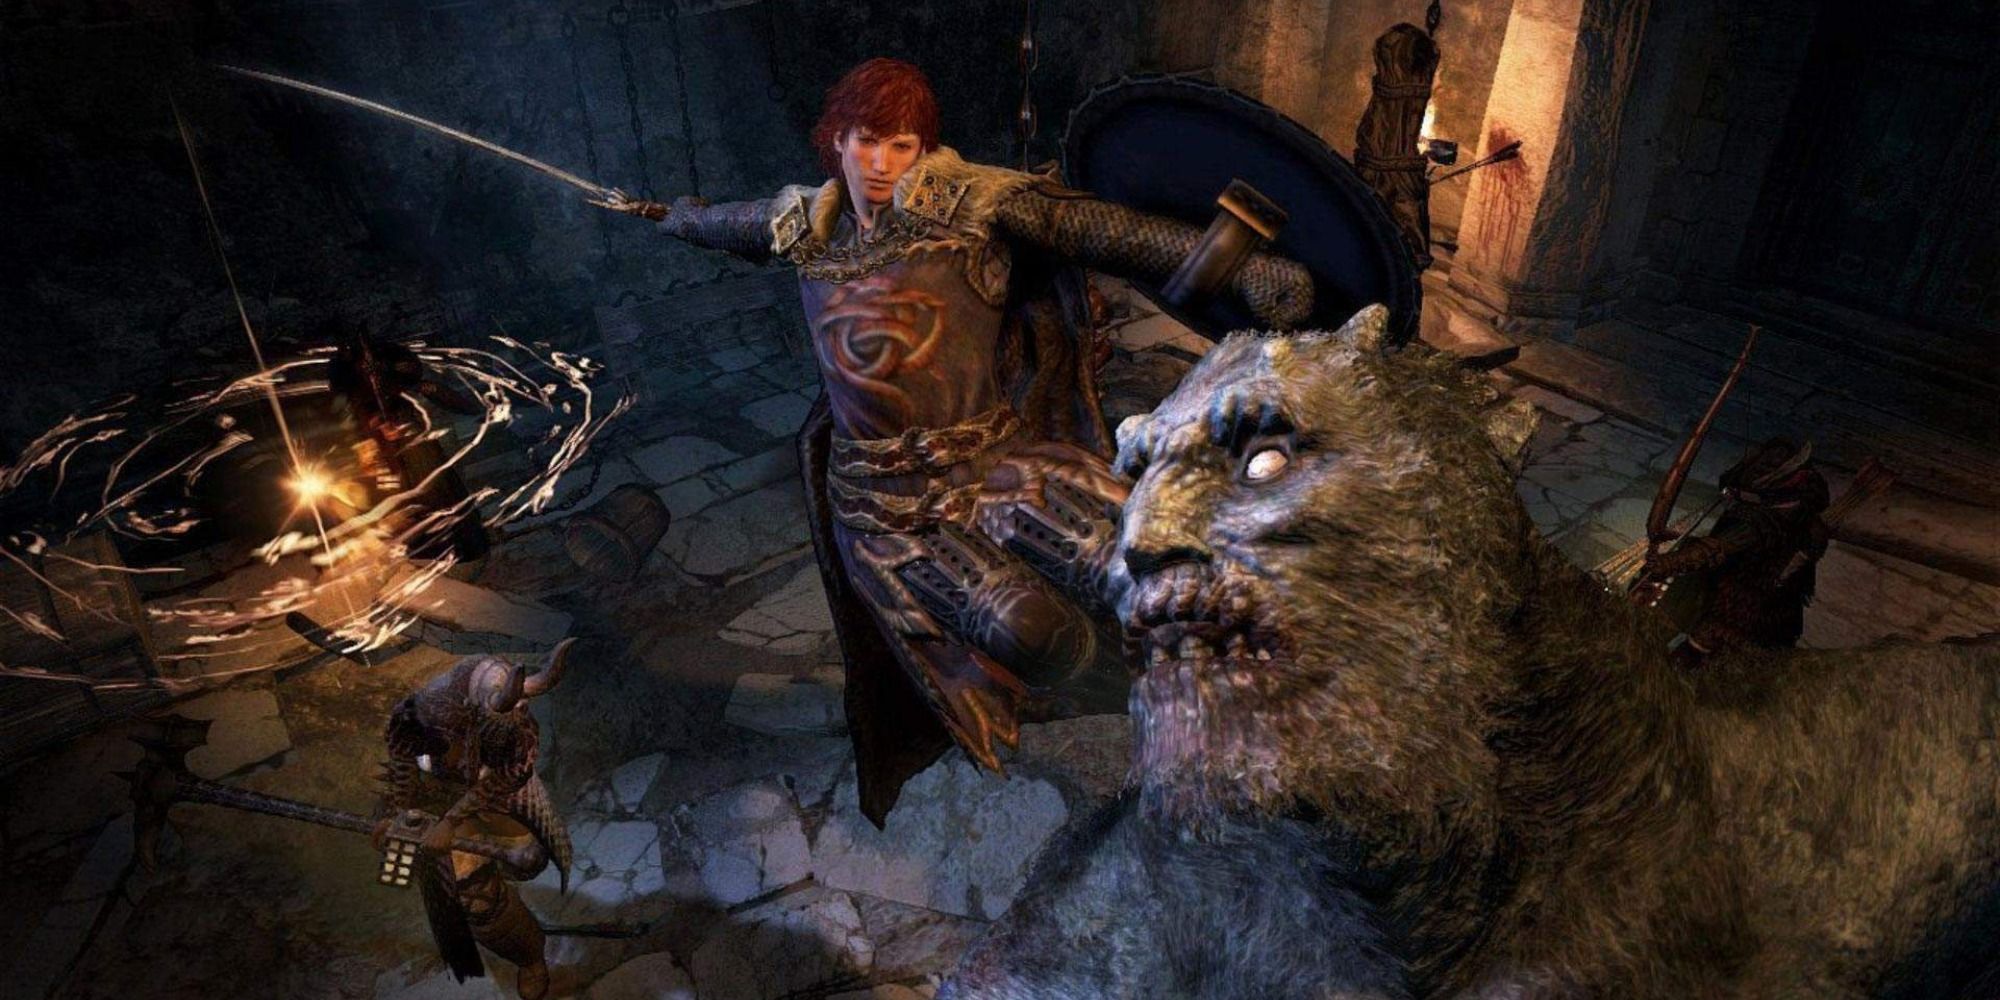 Dragon's Dogma RPG combat screenshot of the character with a sword and shield in the air.